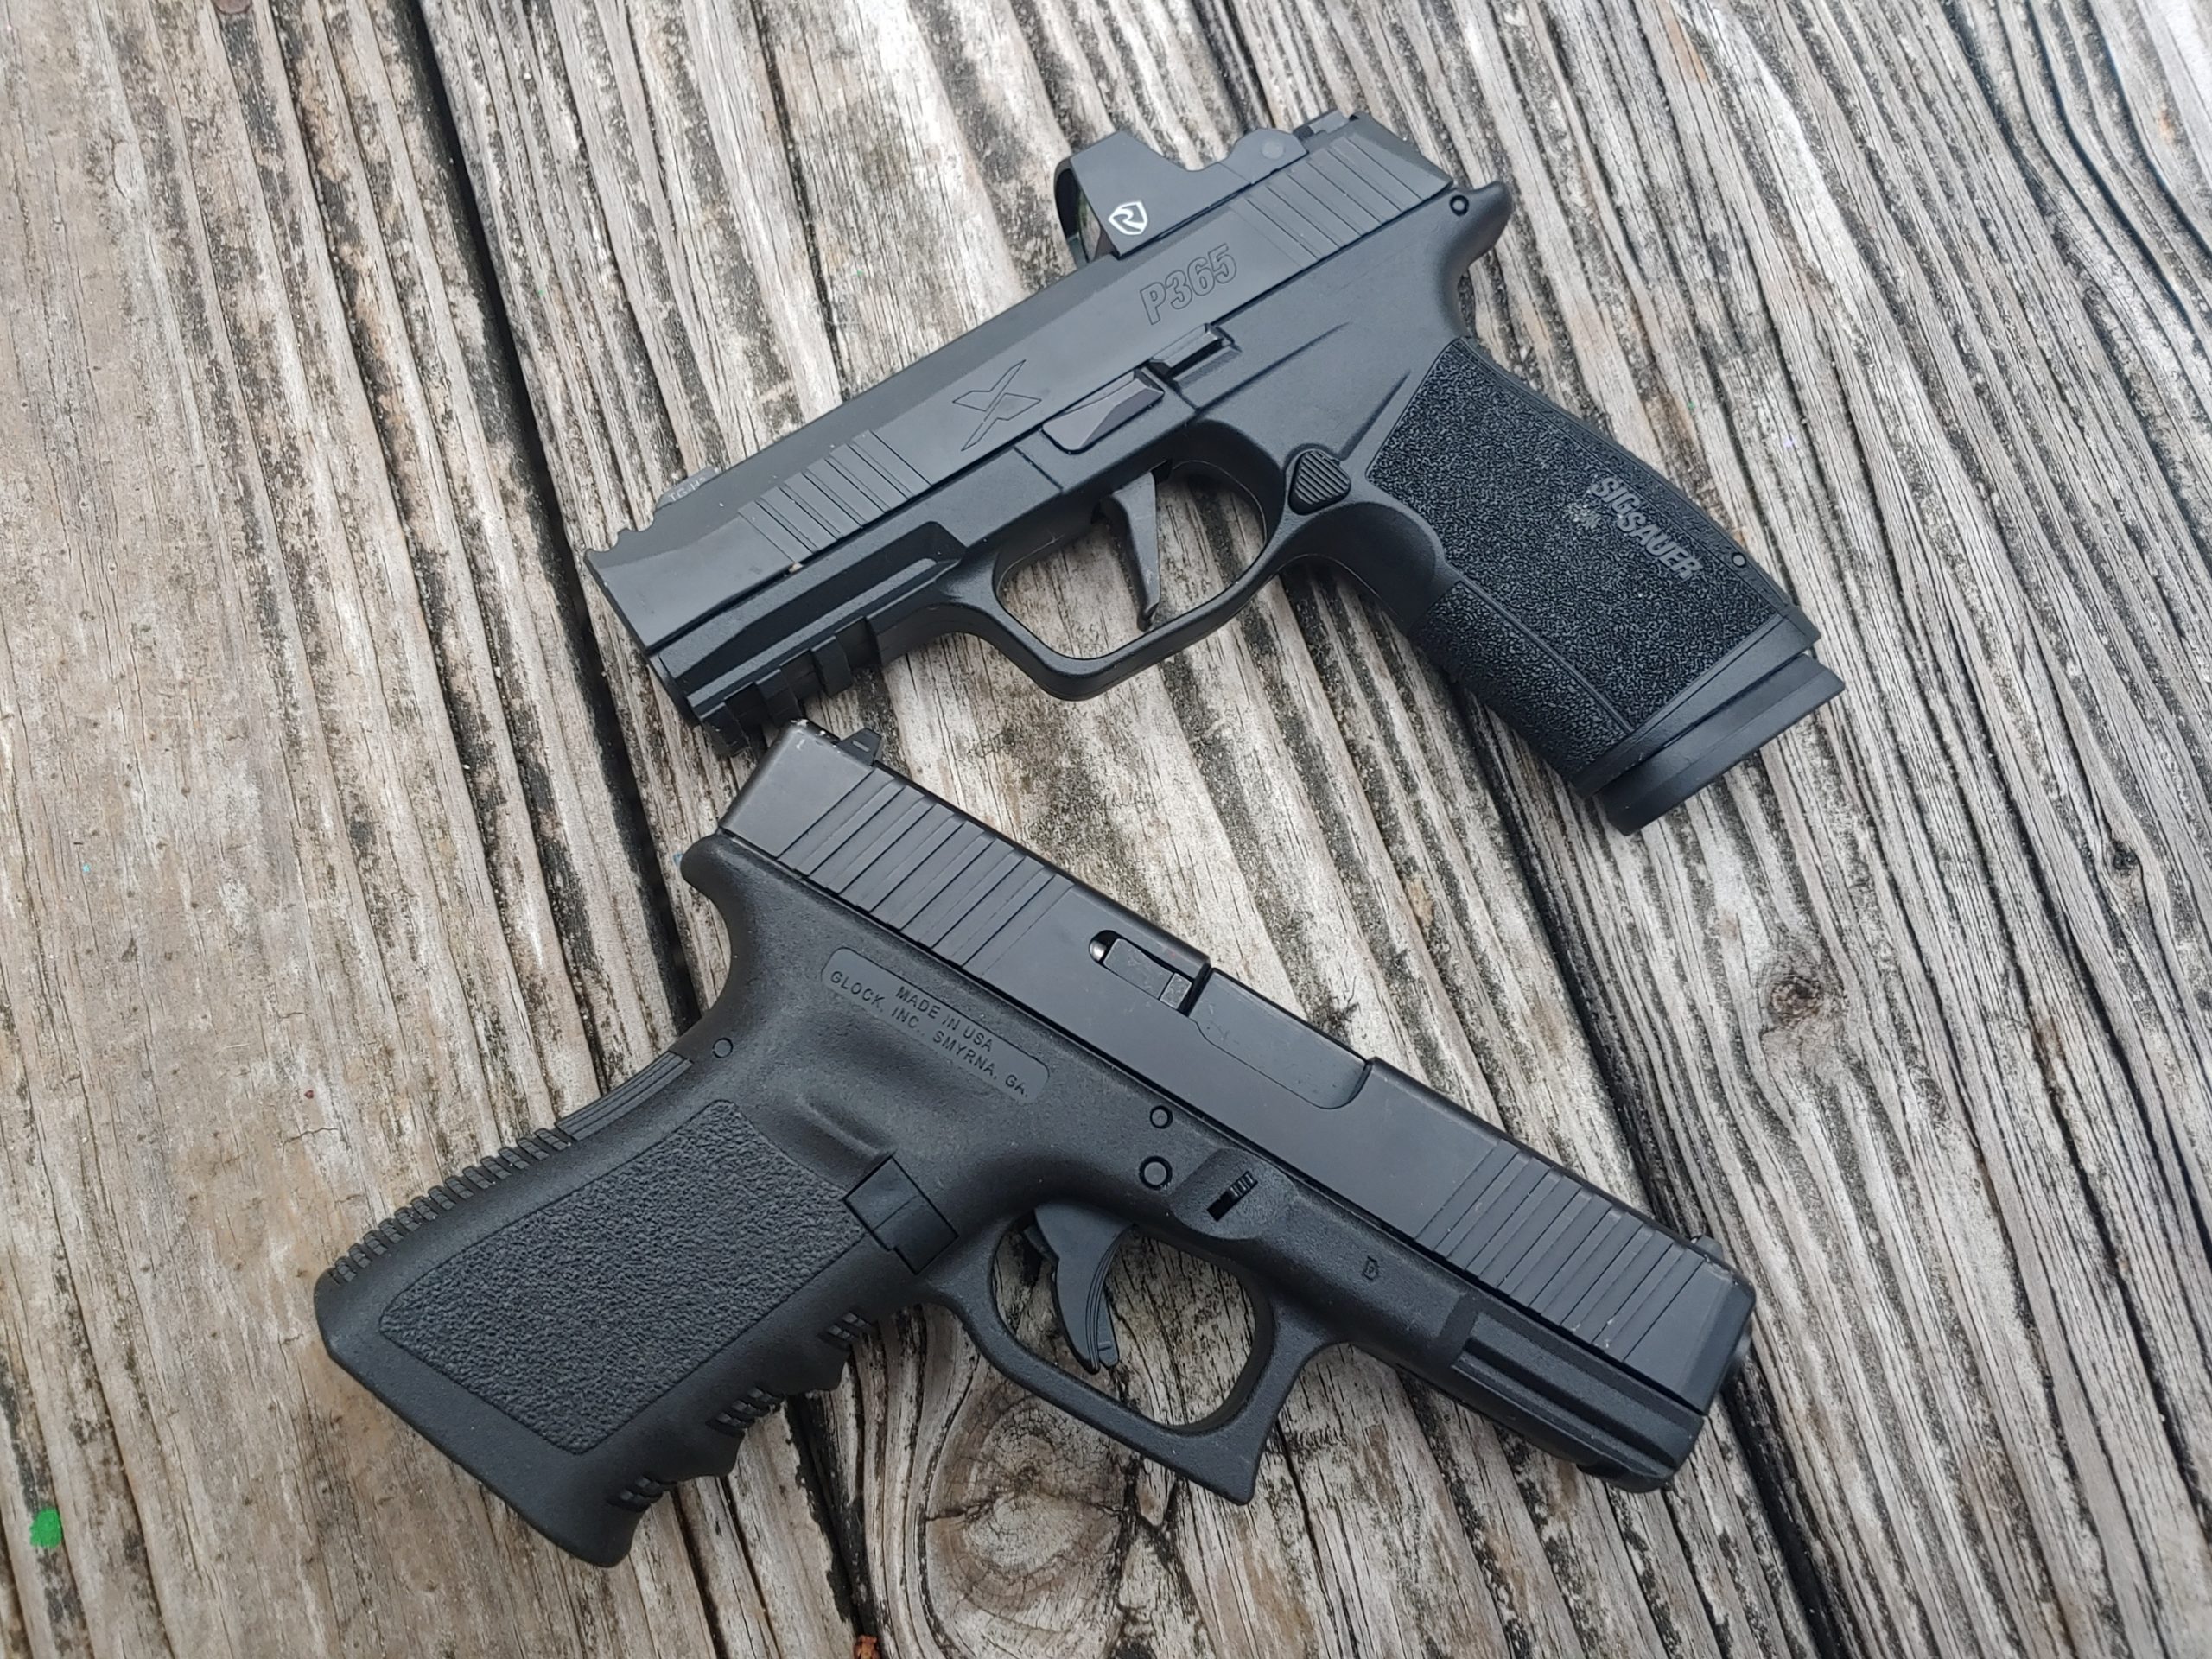 Glock 26 vs 19 Comparison: Which to Choose for Concealed Carry